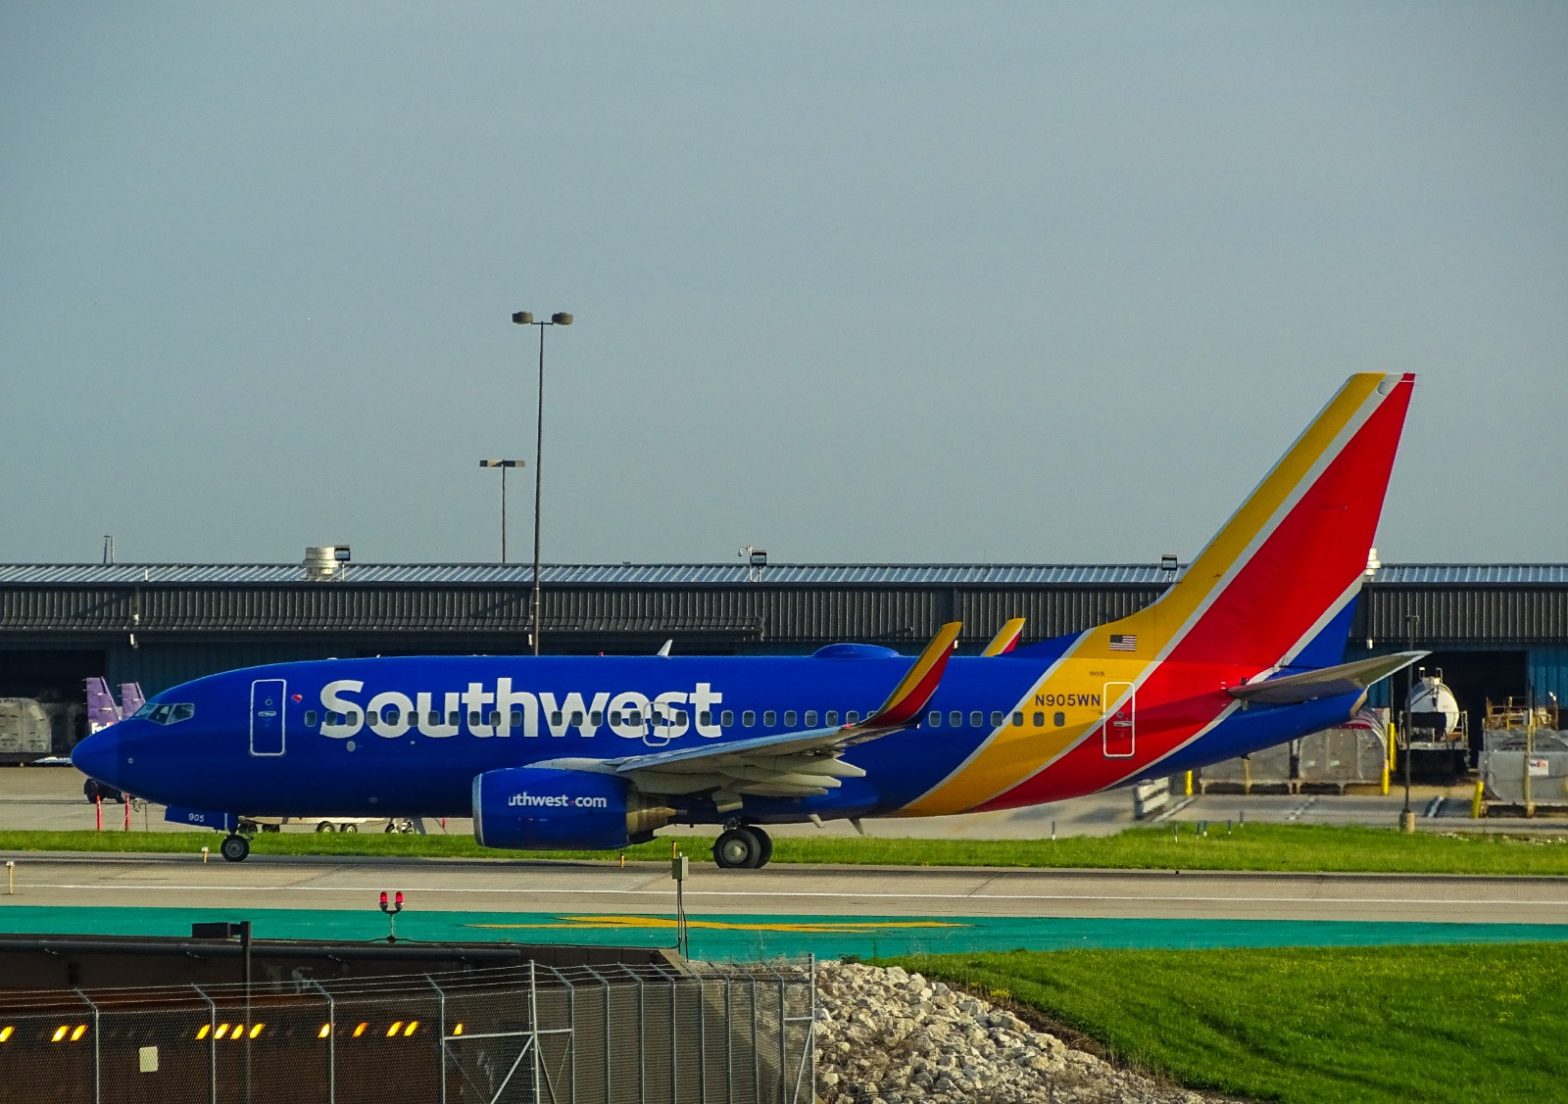 Southwest Airlines flight made emergency landing in Cuba after striking a bird: Reports